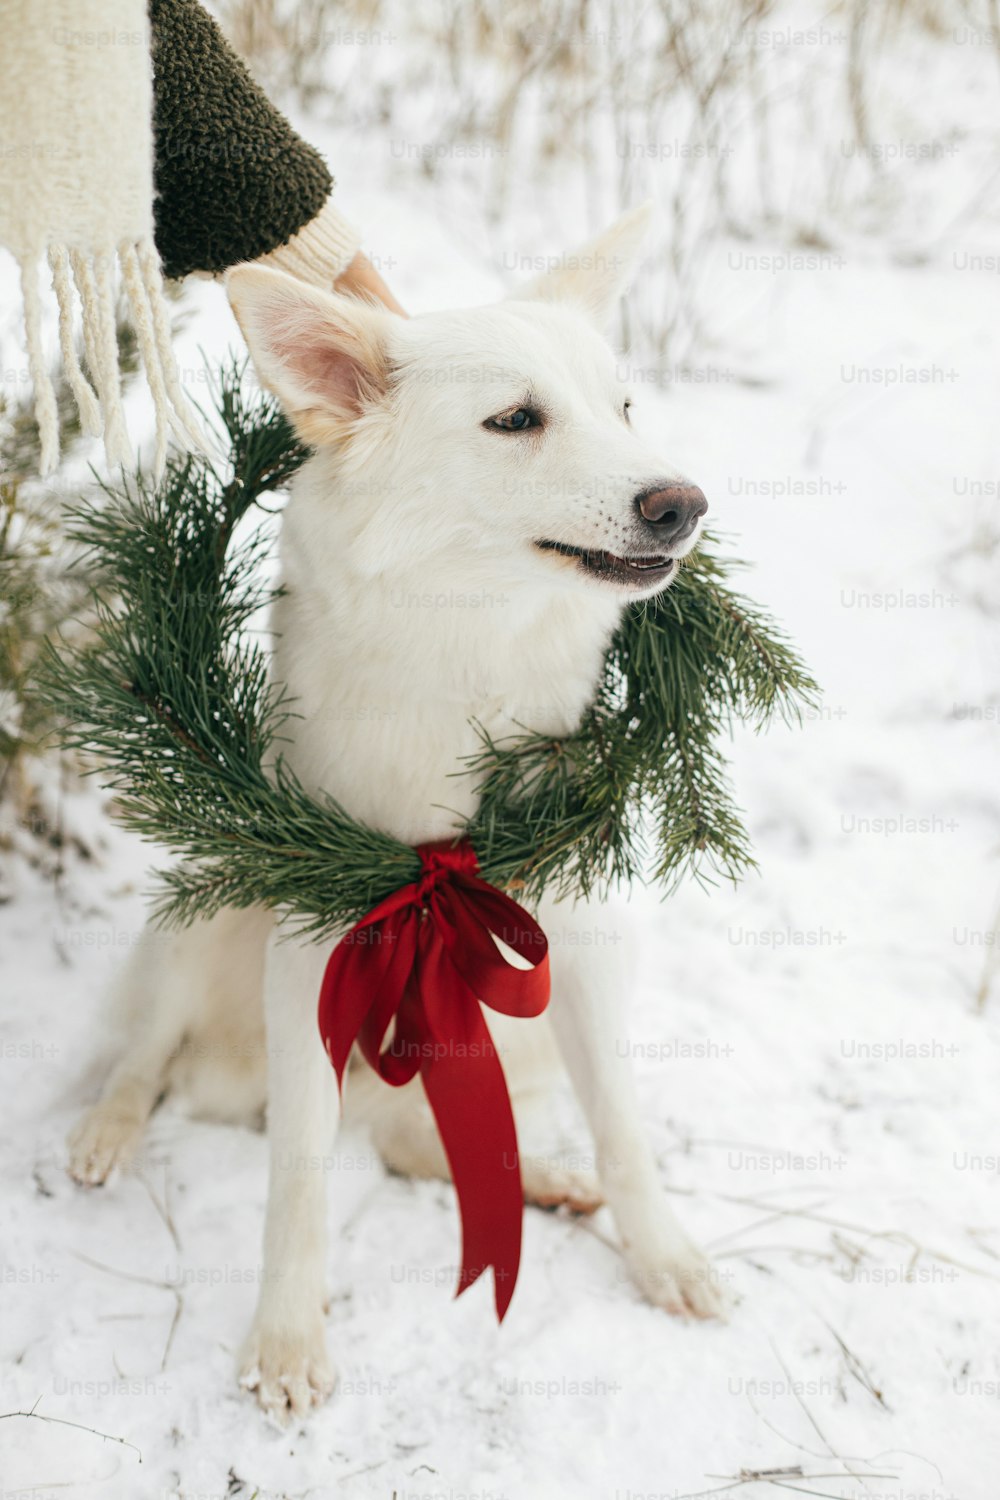 Cute dog in christmas wreath and owner in snowy winter park. Adorable white Swiss Shepherd dog in xmas wreath with pine branches and red bow. Winter holidays in countryside. Merry Christmas!